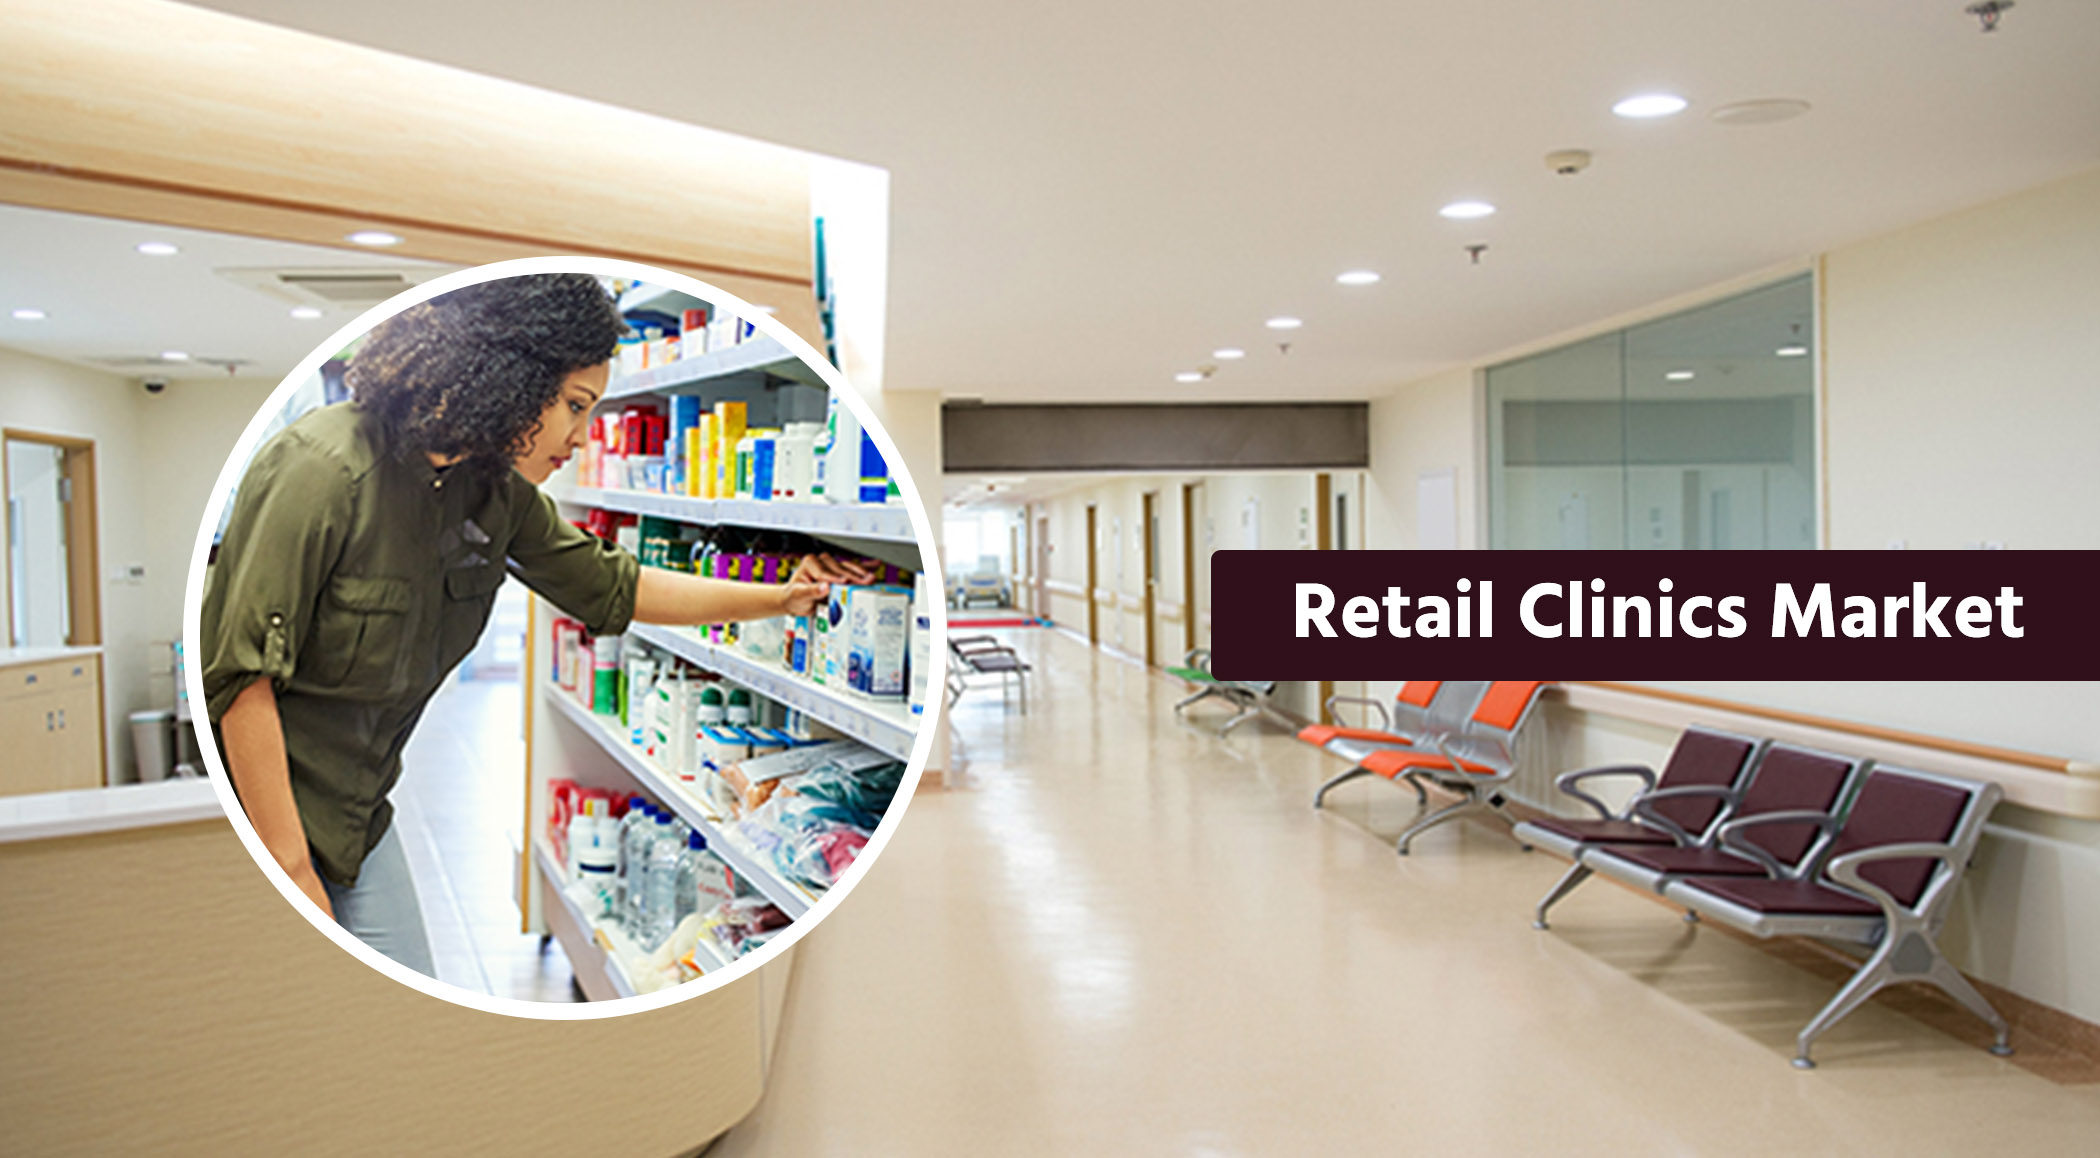 Retail Clinics Market is Likely to Register a CAGR of 11.2 % Between 2019 to 2030